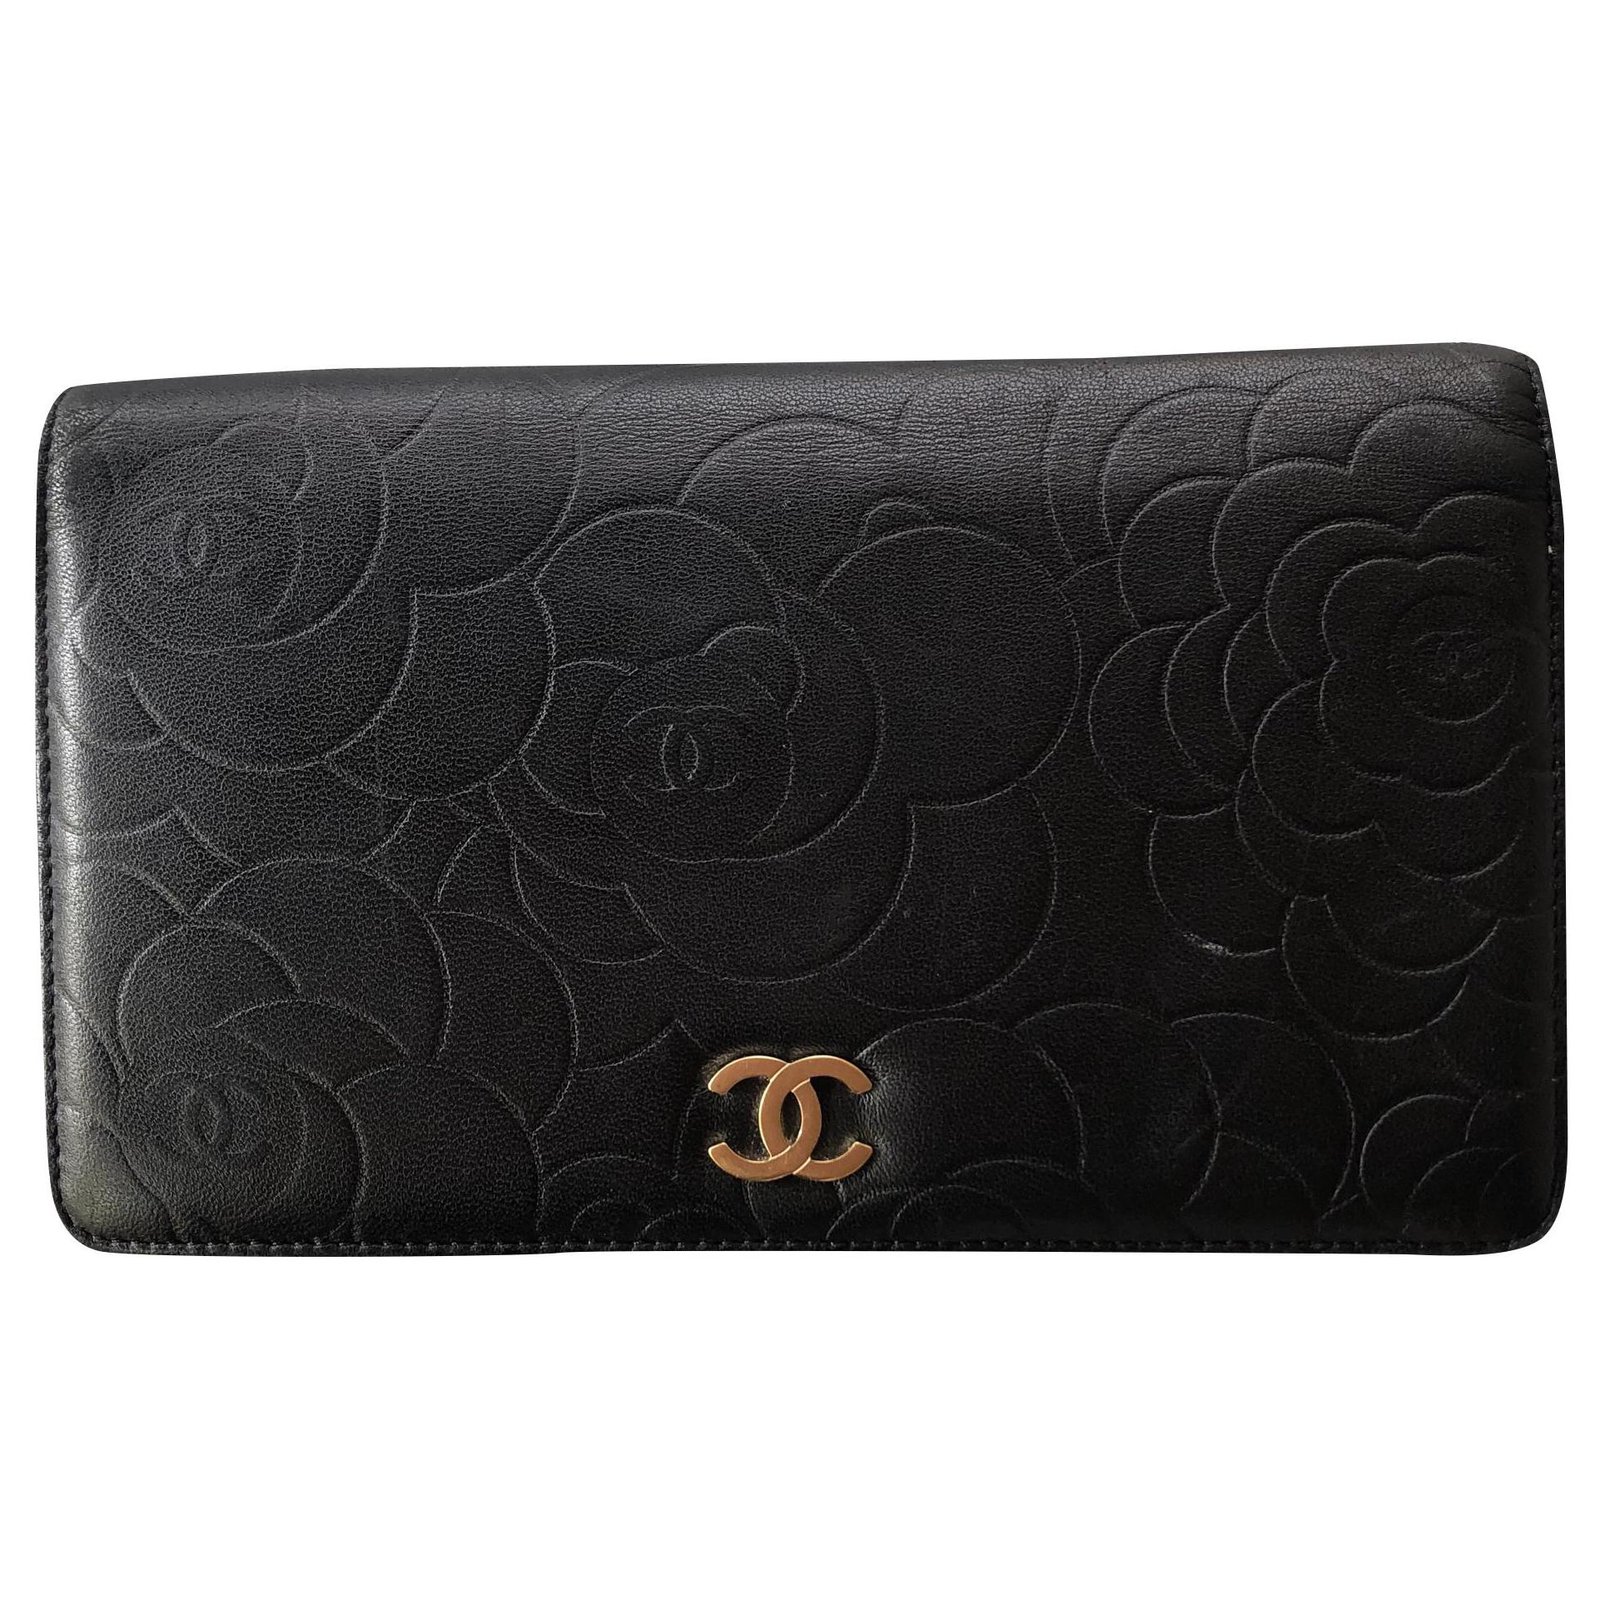 Chanel Black Leather Camellia Flap Wallet Chanel